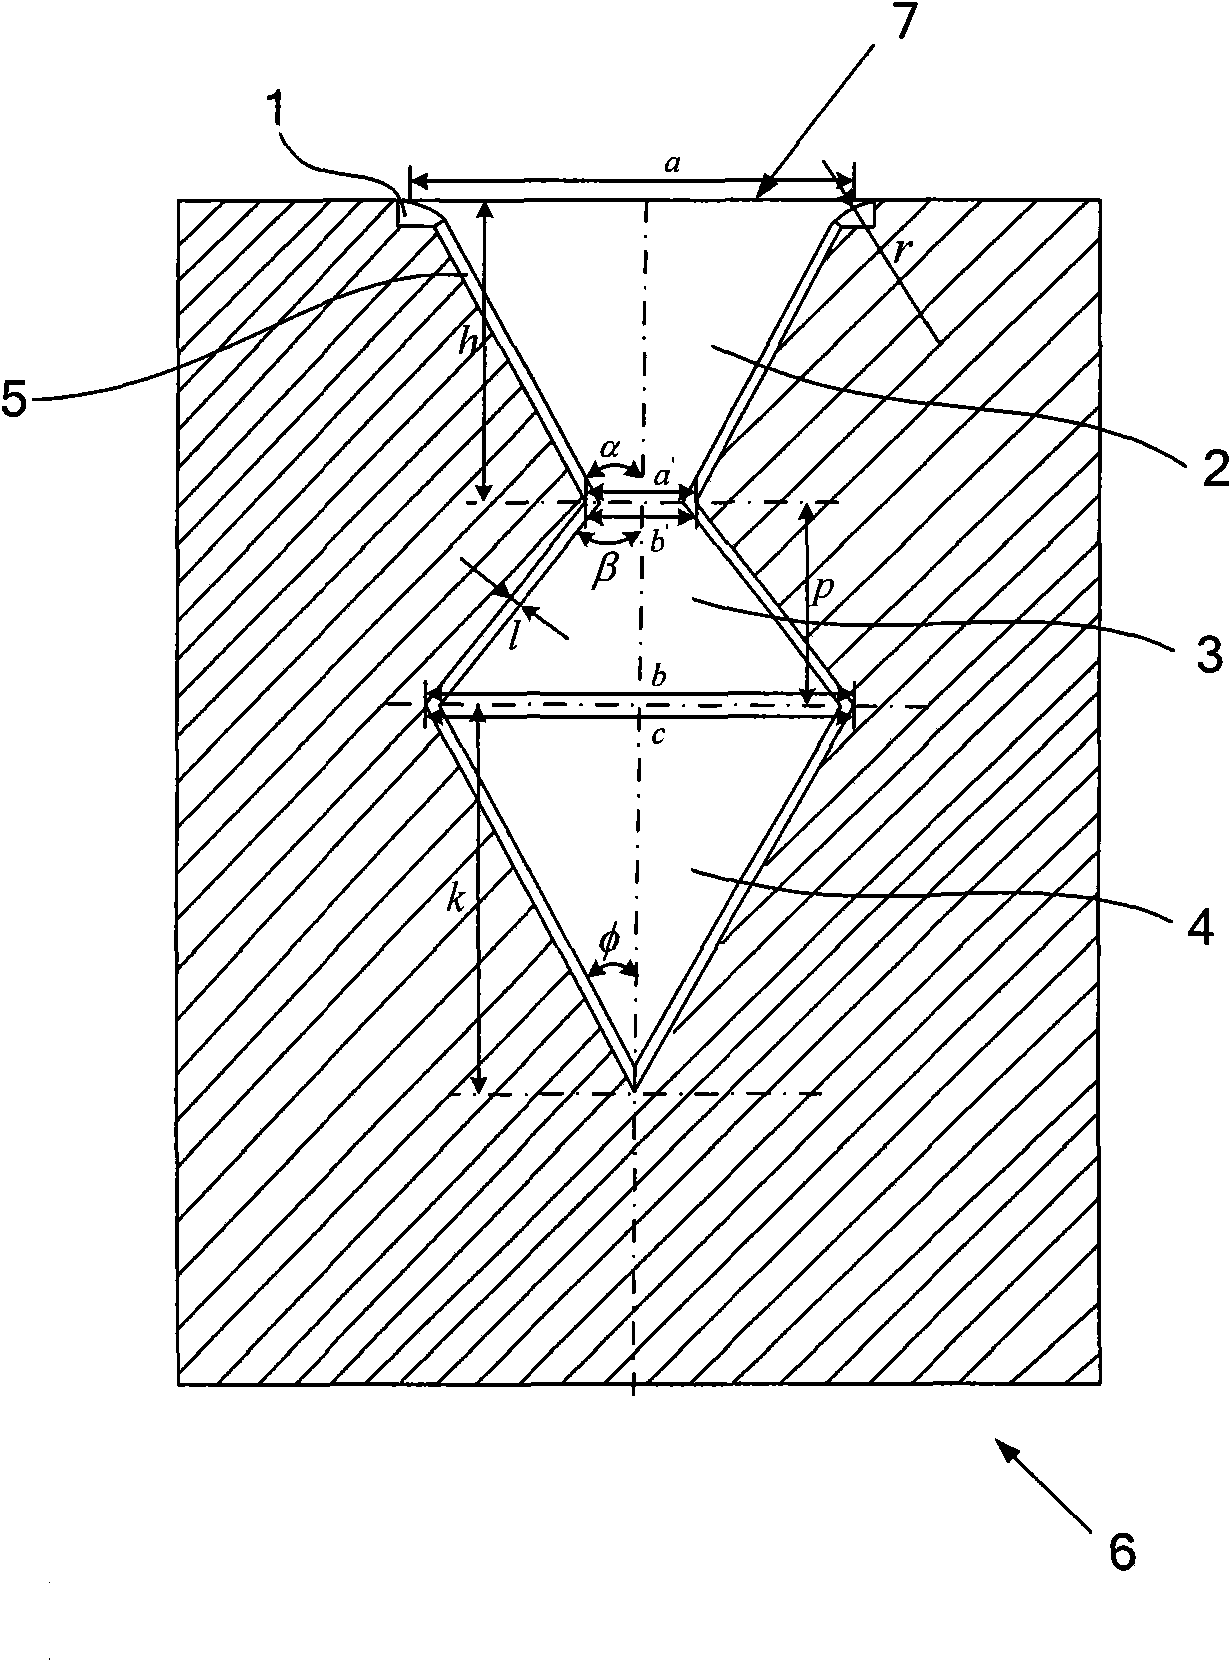 Millimeter wave blackbody radiation calibration source with biconical cavity serial structure